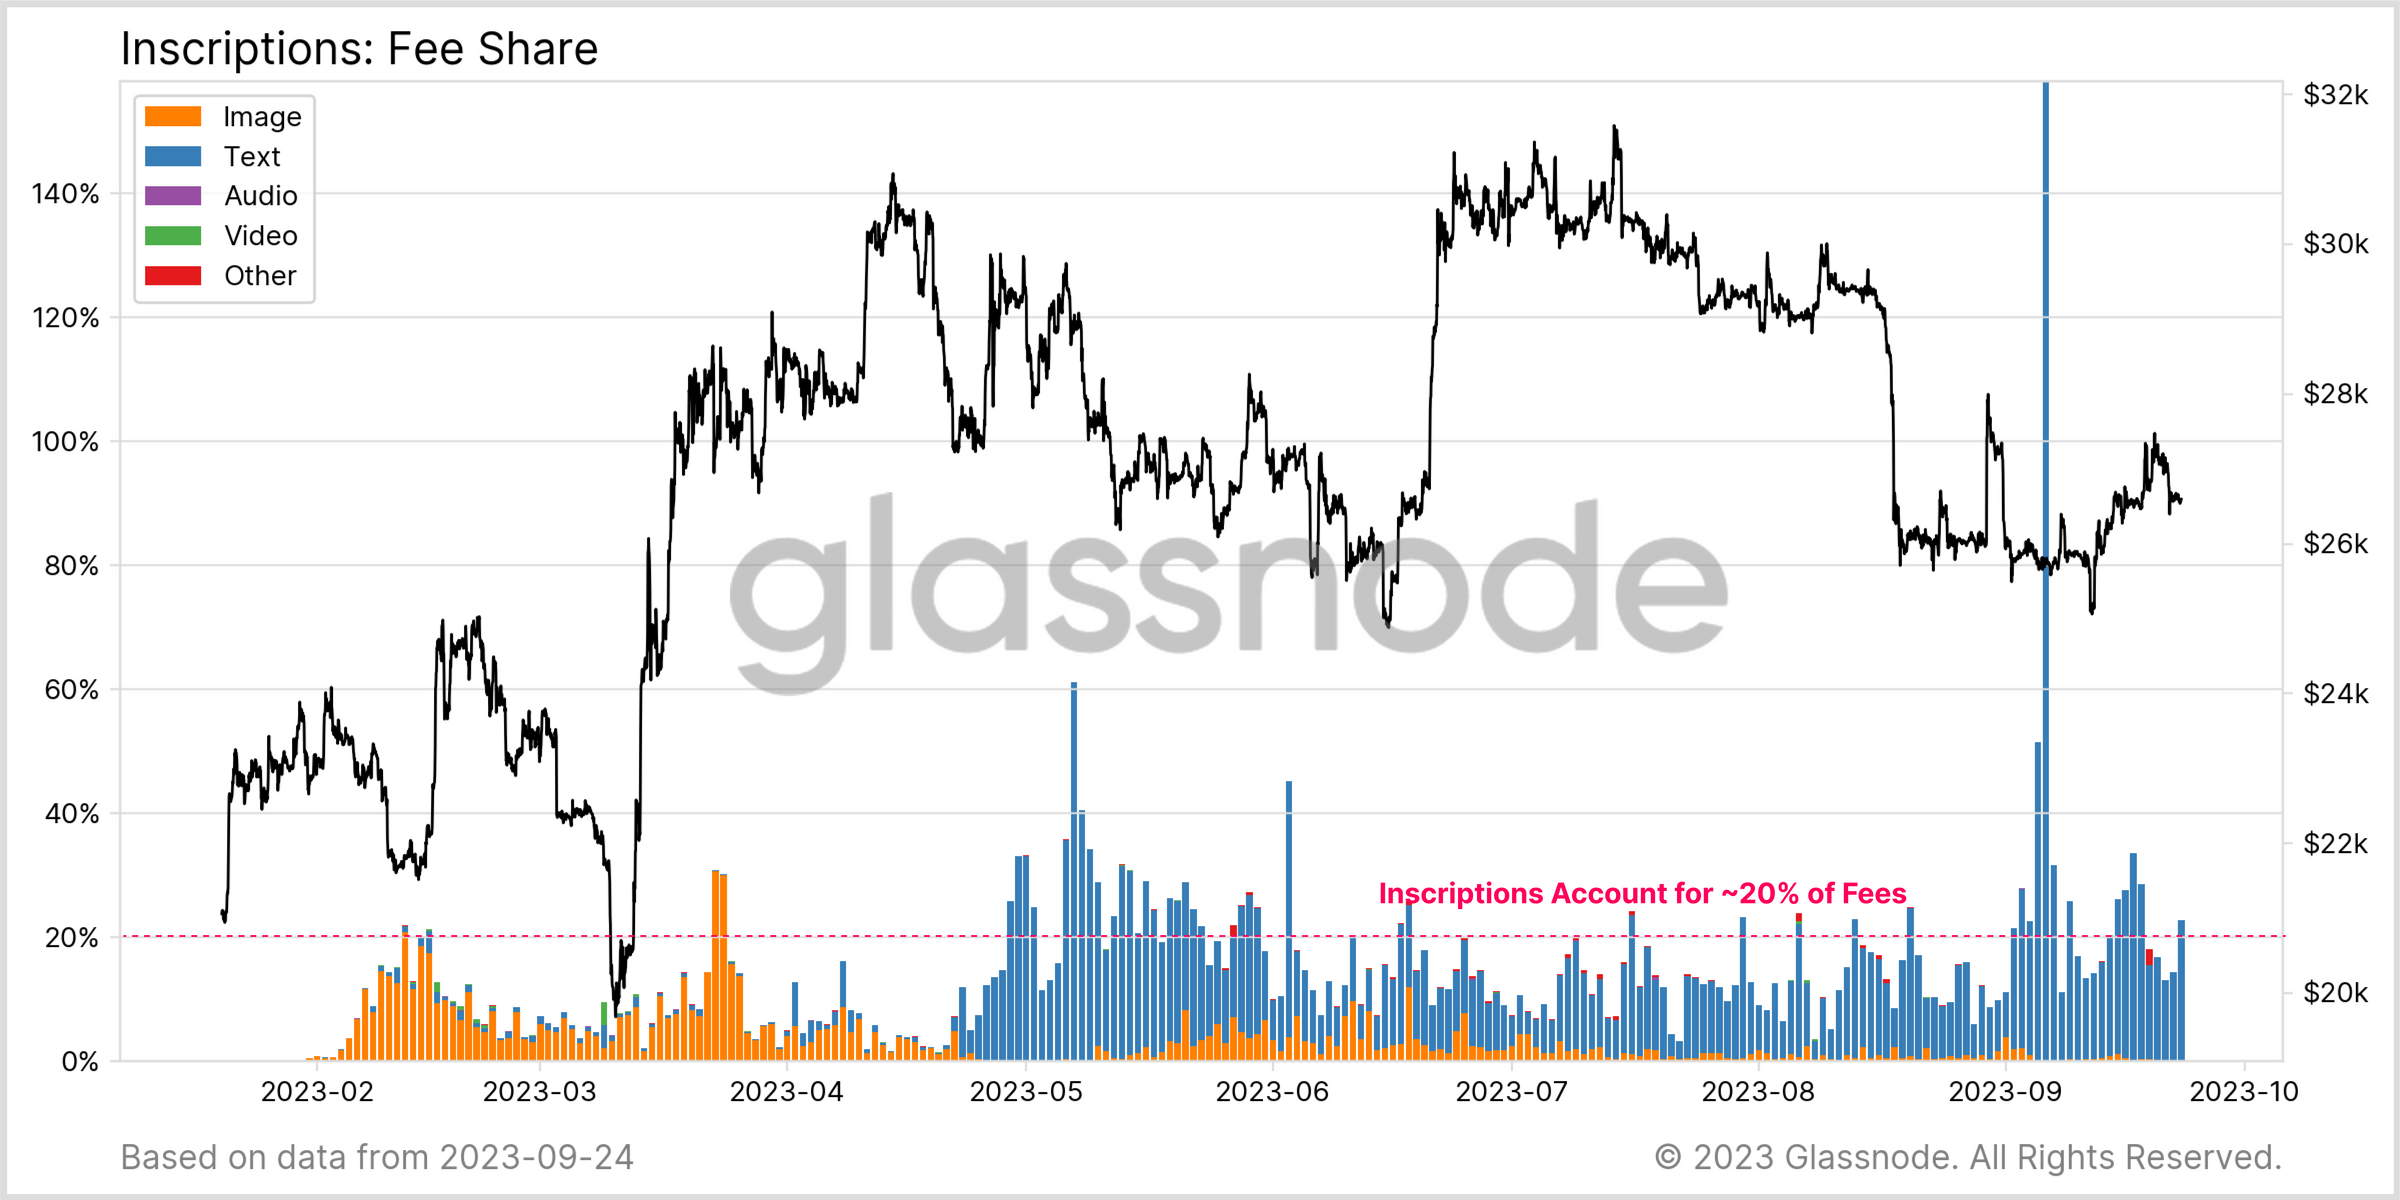 Monetary Transfers Readily Displace Inscriptions on Bitcoin, Glassnode Reveals